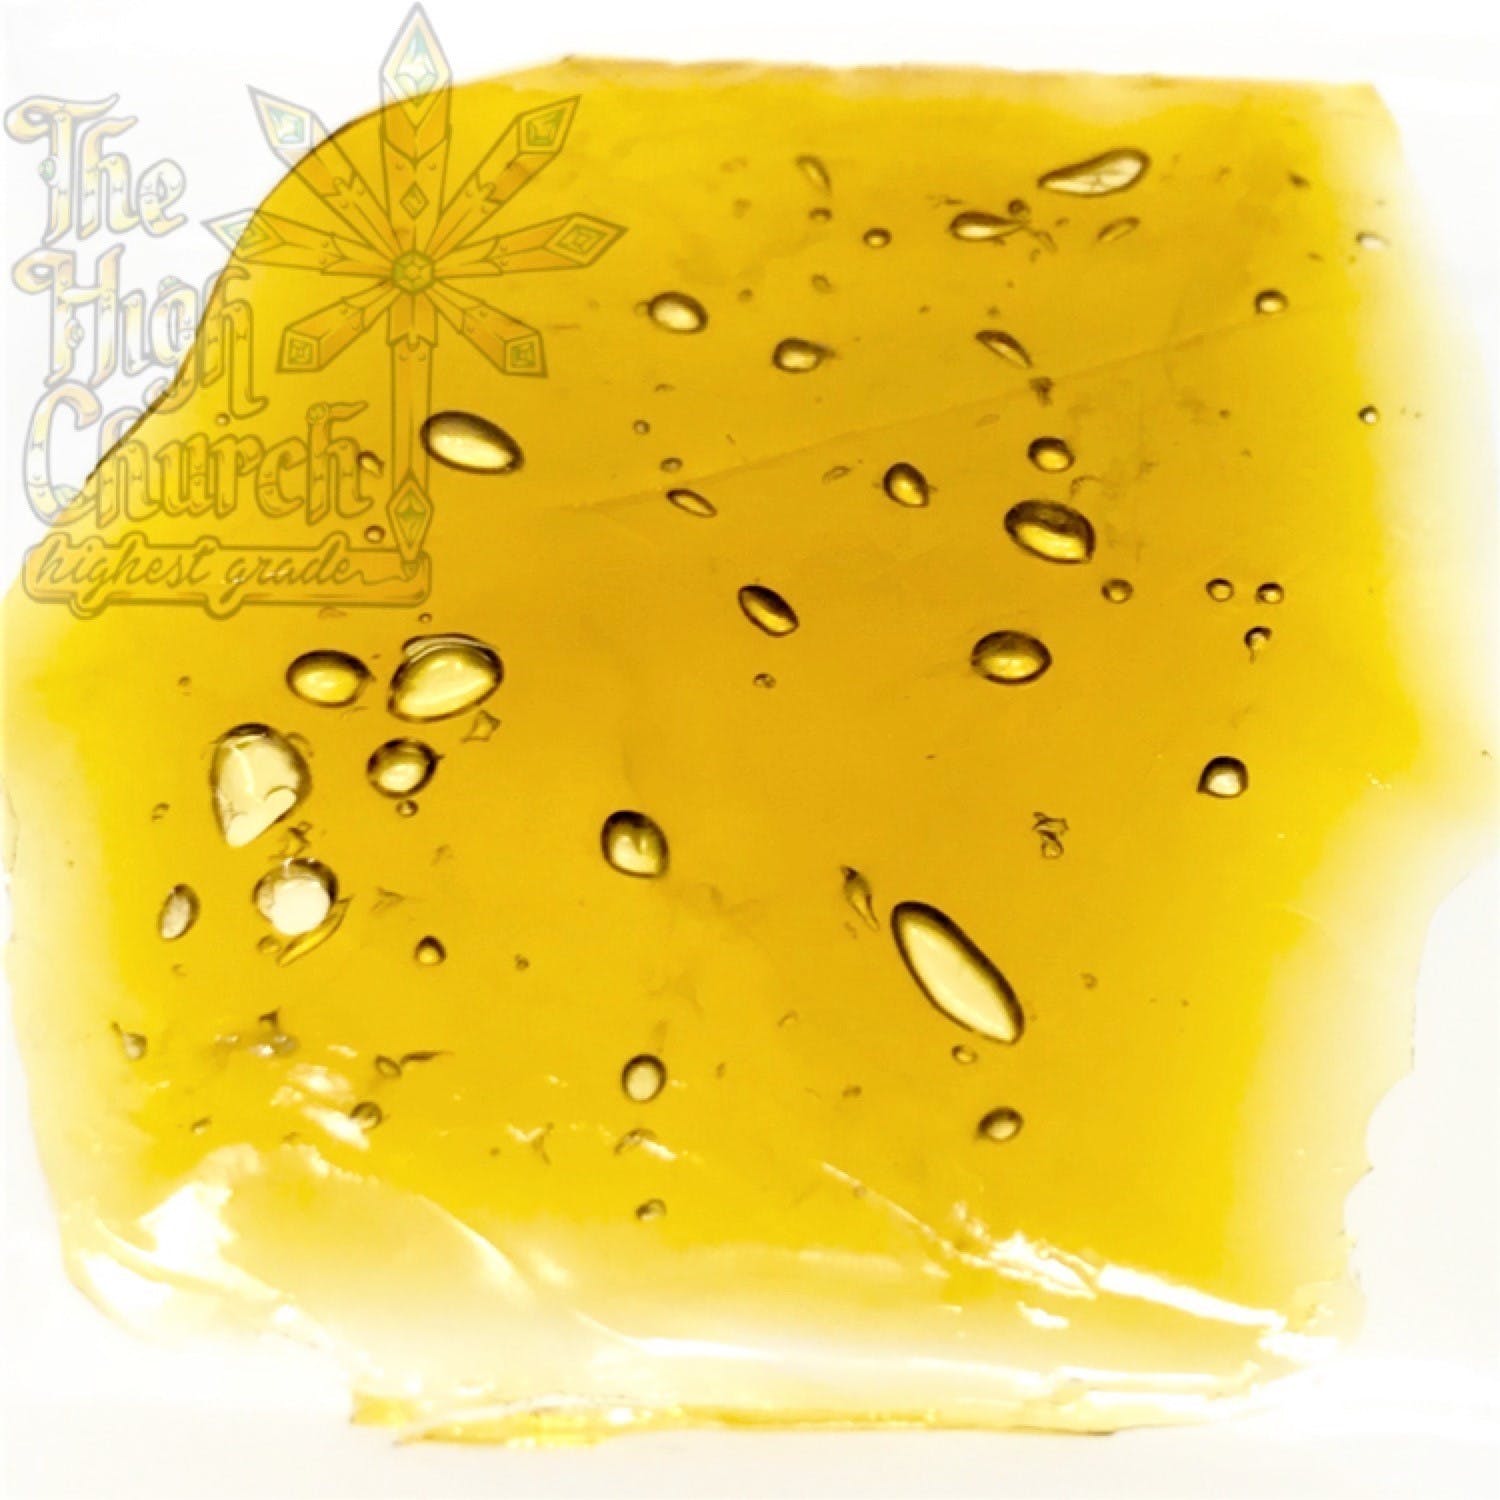 concentrate-shaman-extracts-purple-punch-dewaxed-shatter